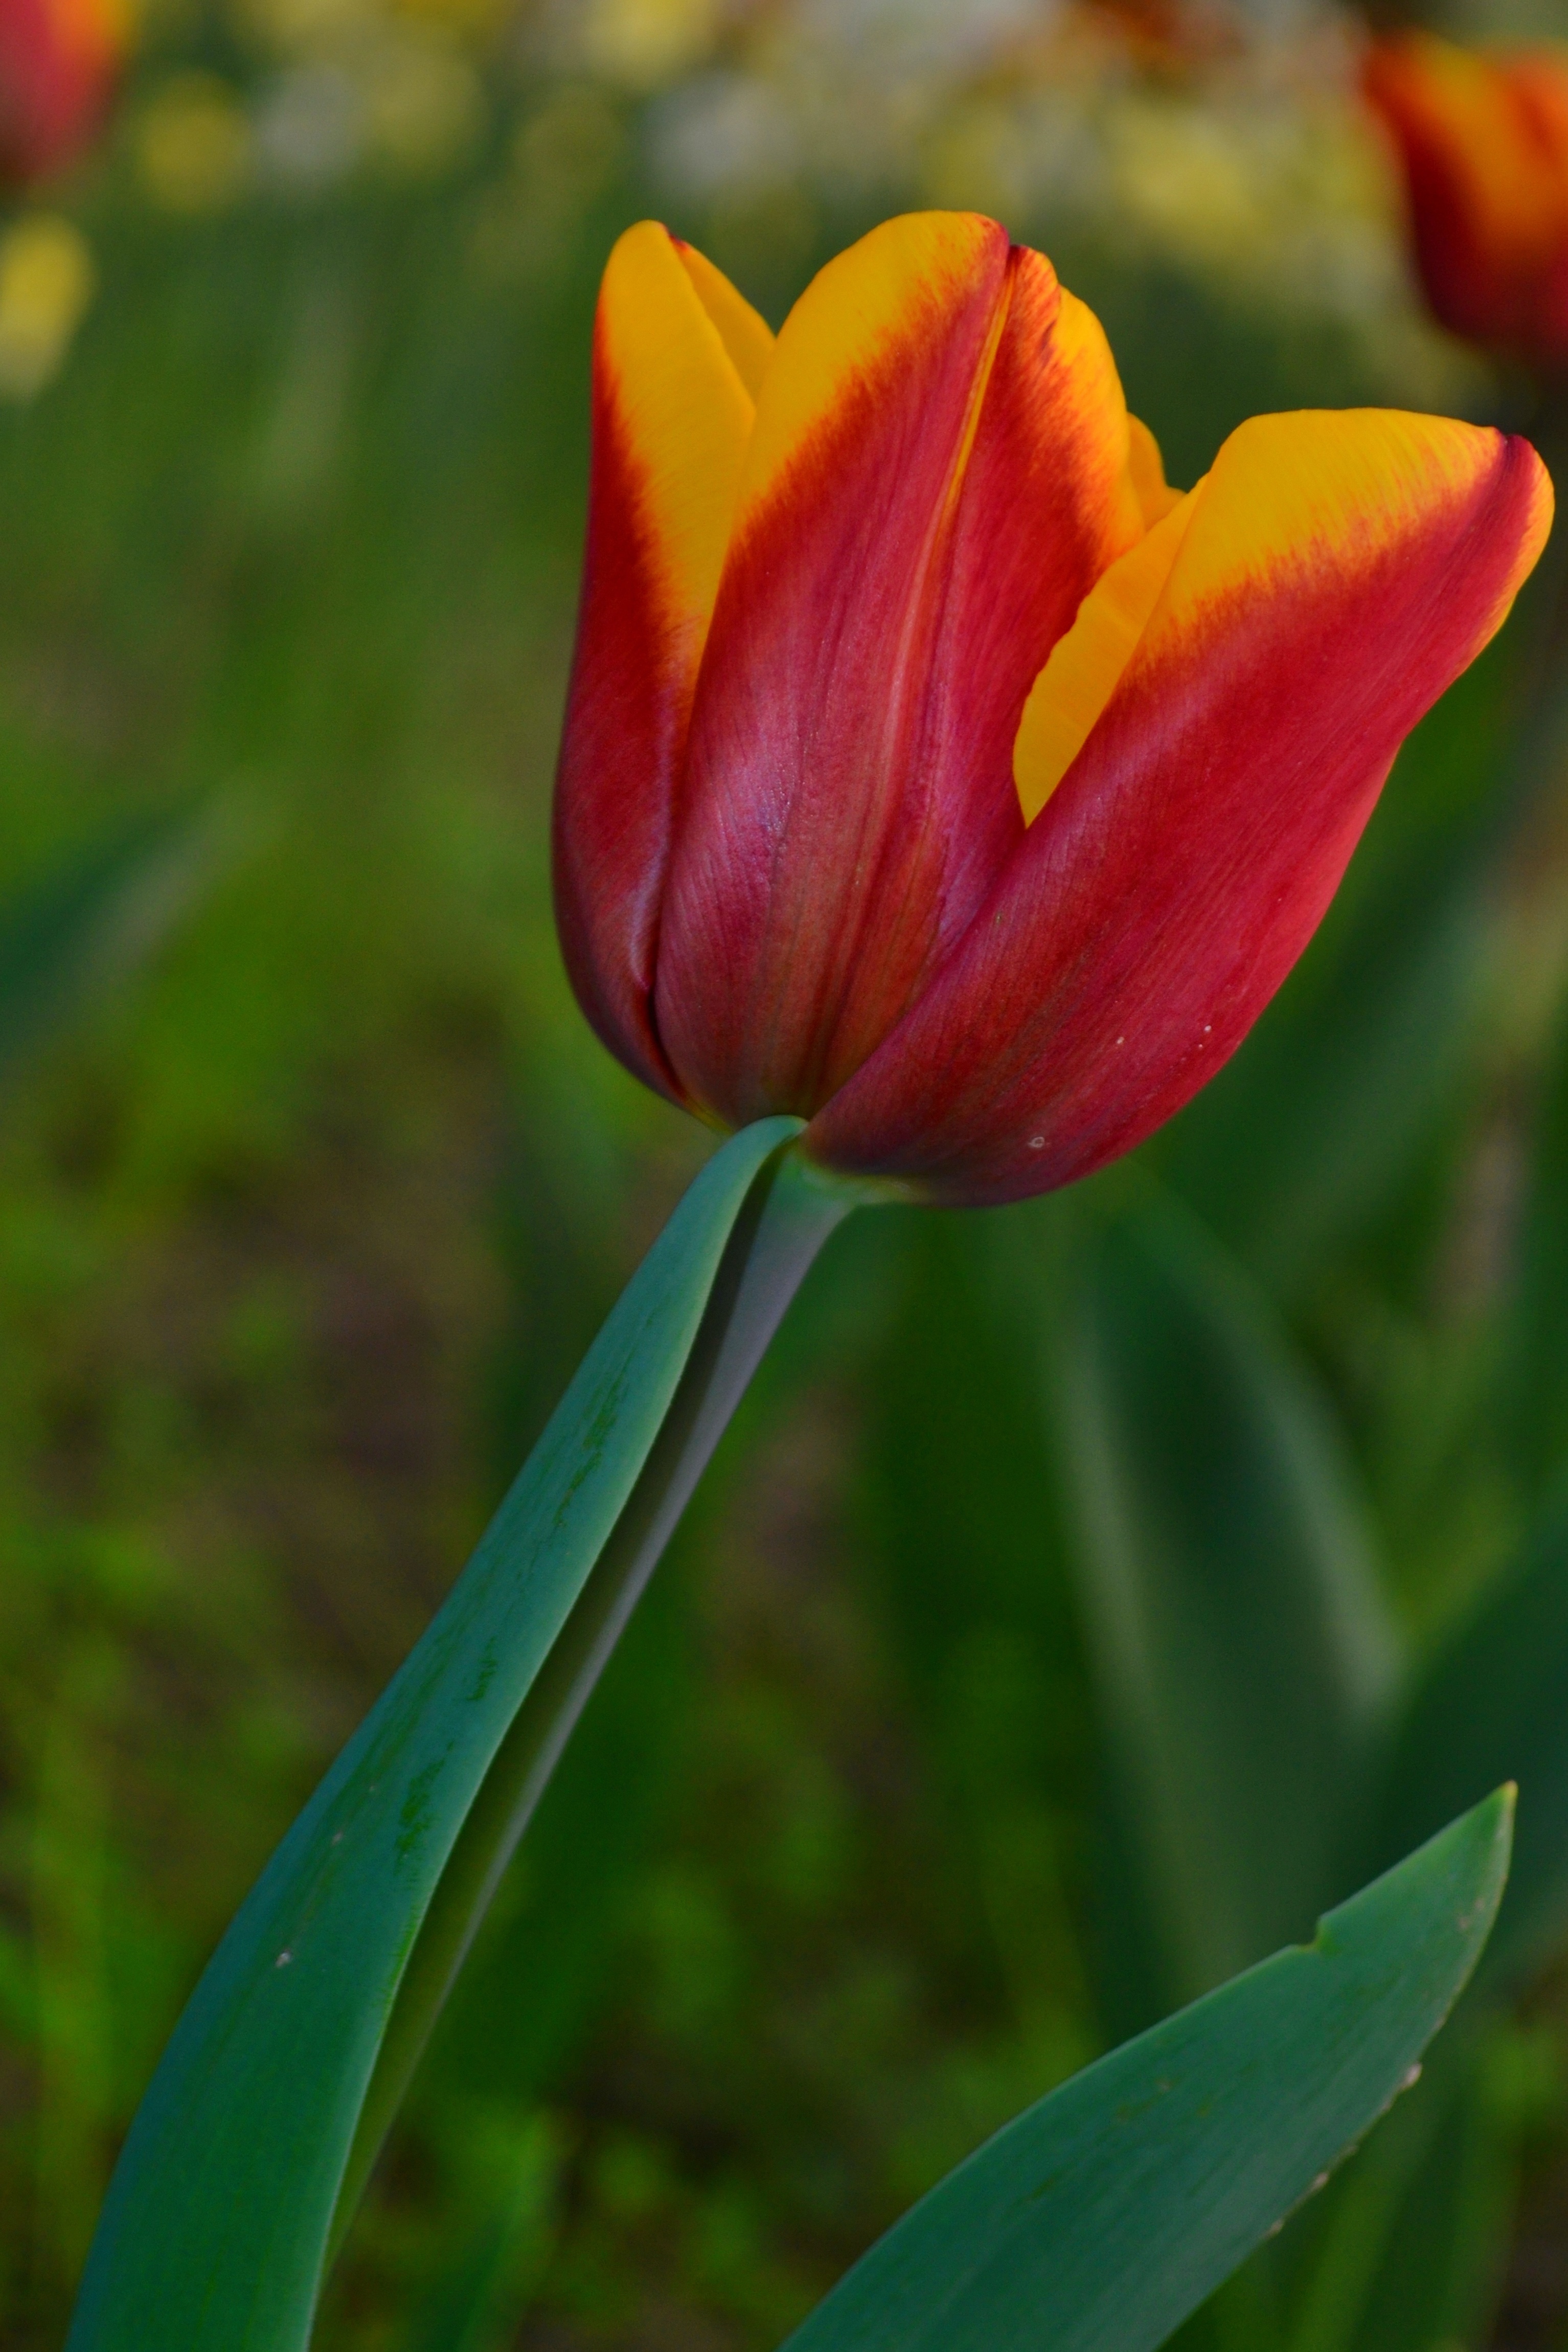 red and yellow petaled flower